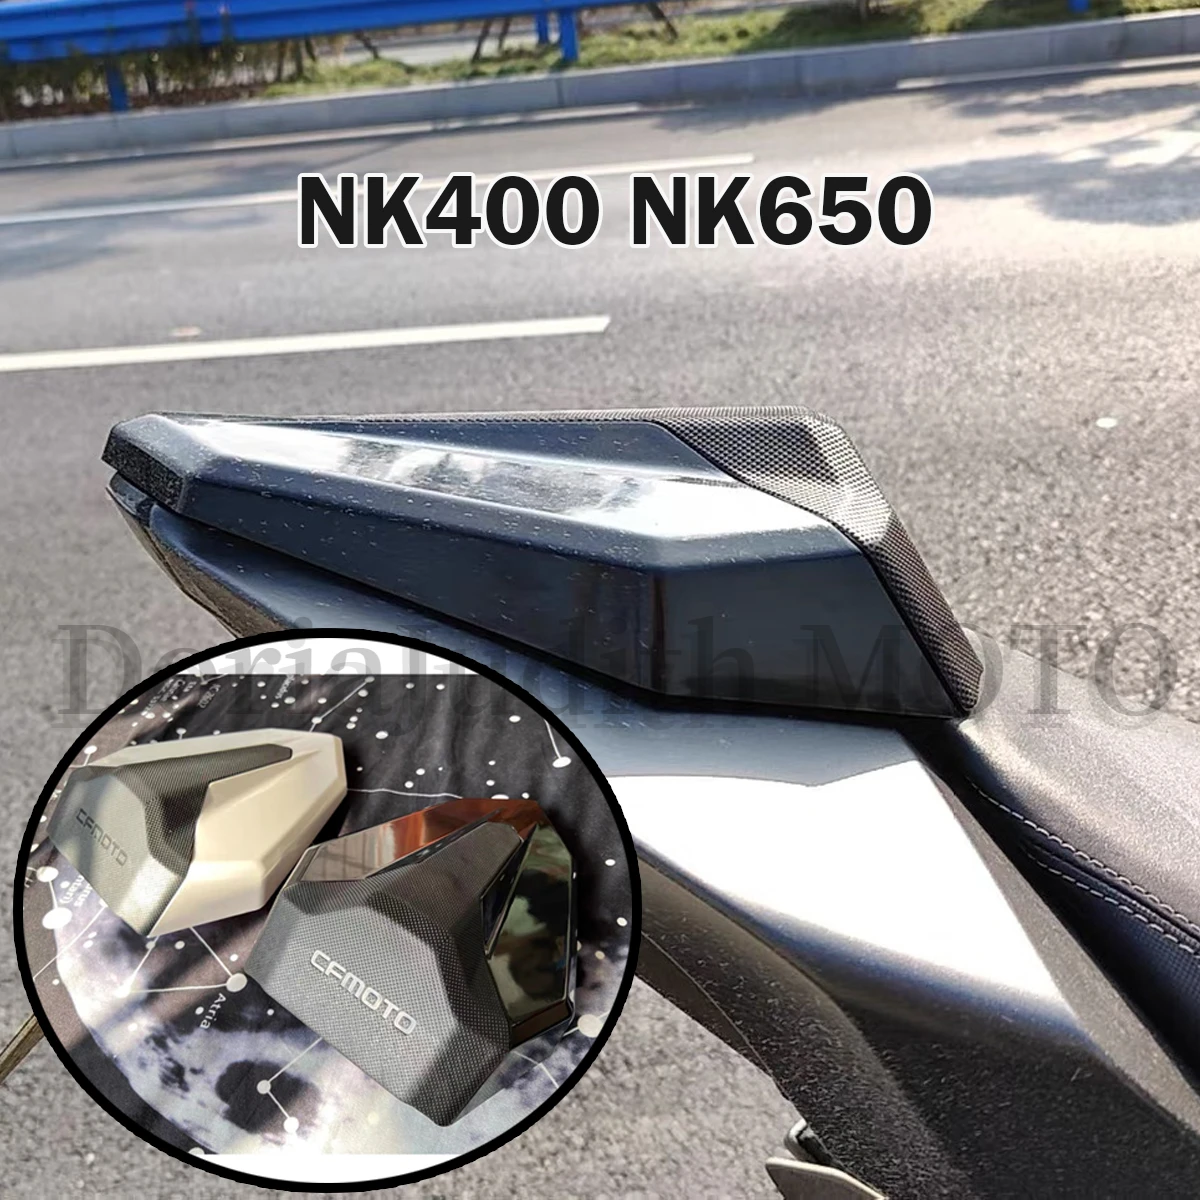 Motorcycle Modification Rear Seat new rear hump seat cover refit Origina... - $162.34